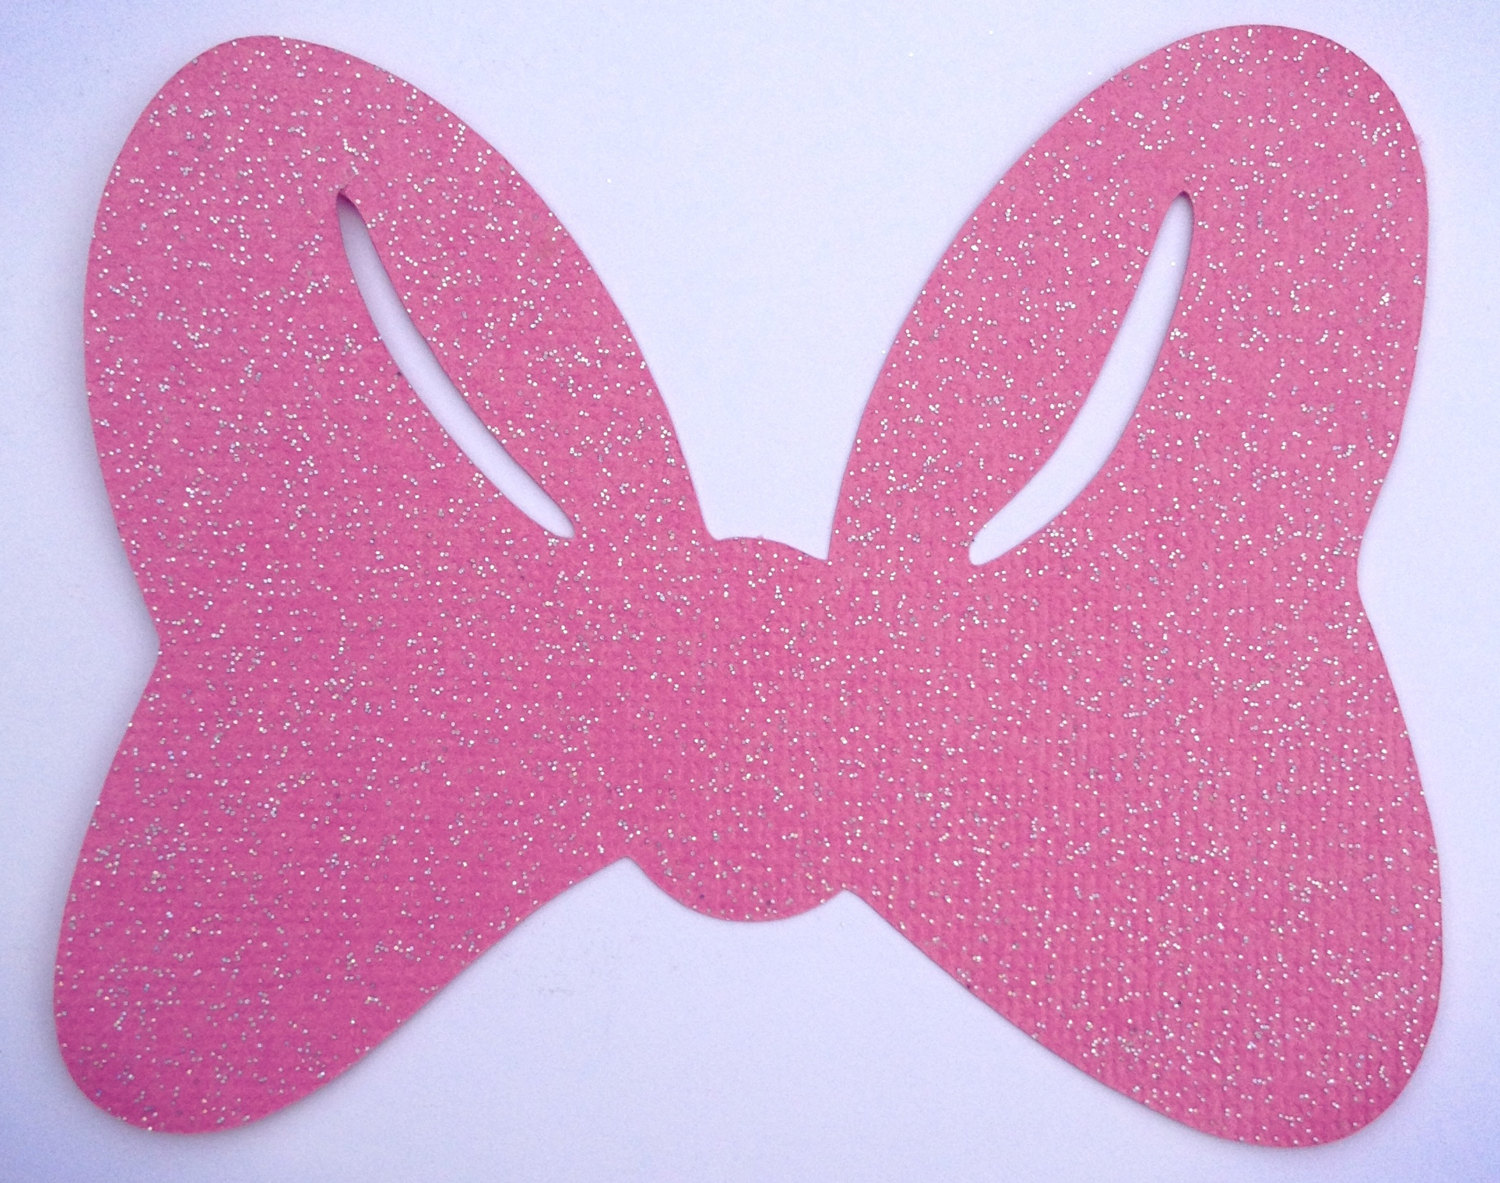 Minnie mouse bow outline free download clip art - WikiClipArt.